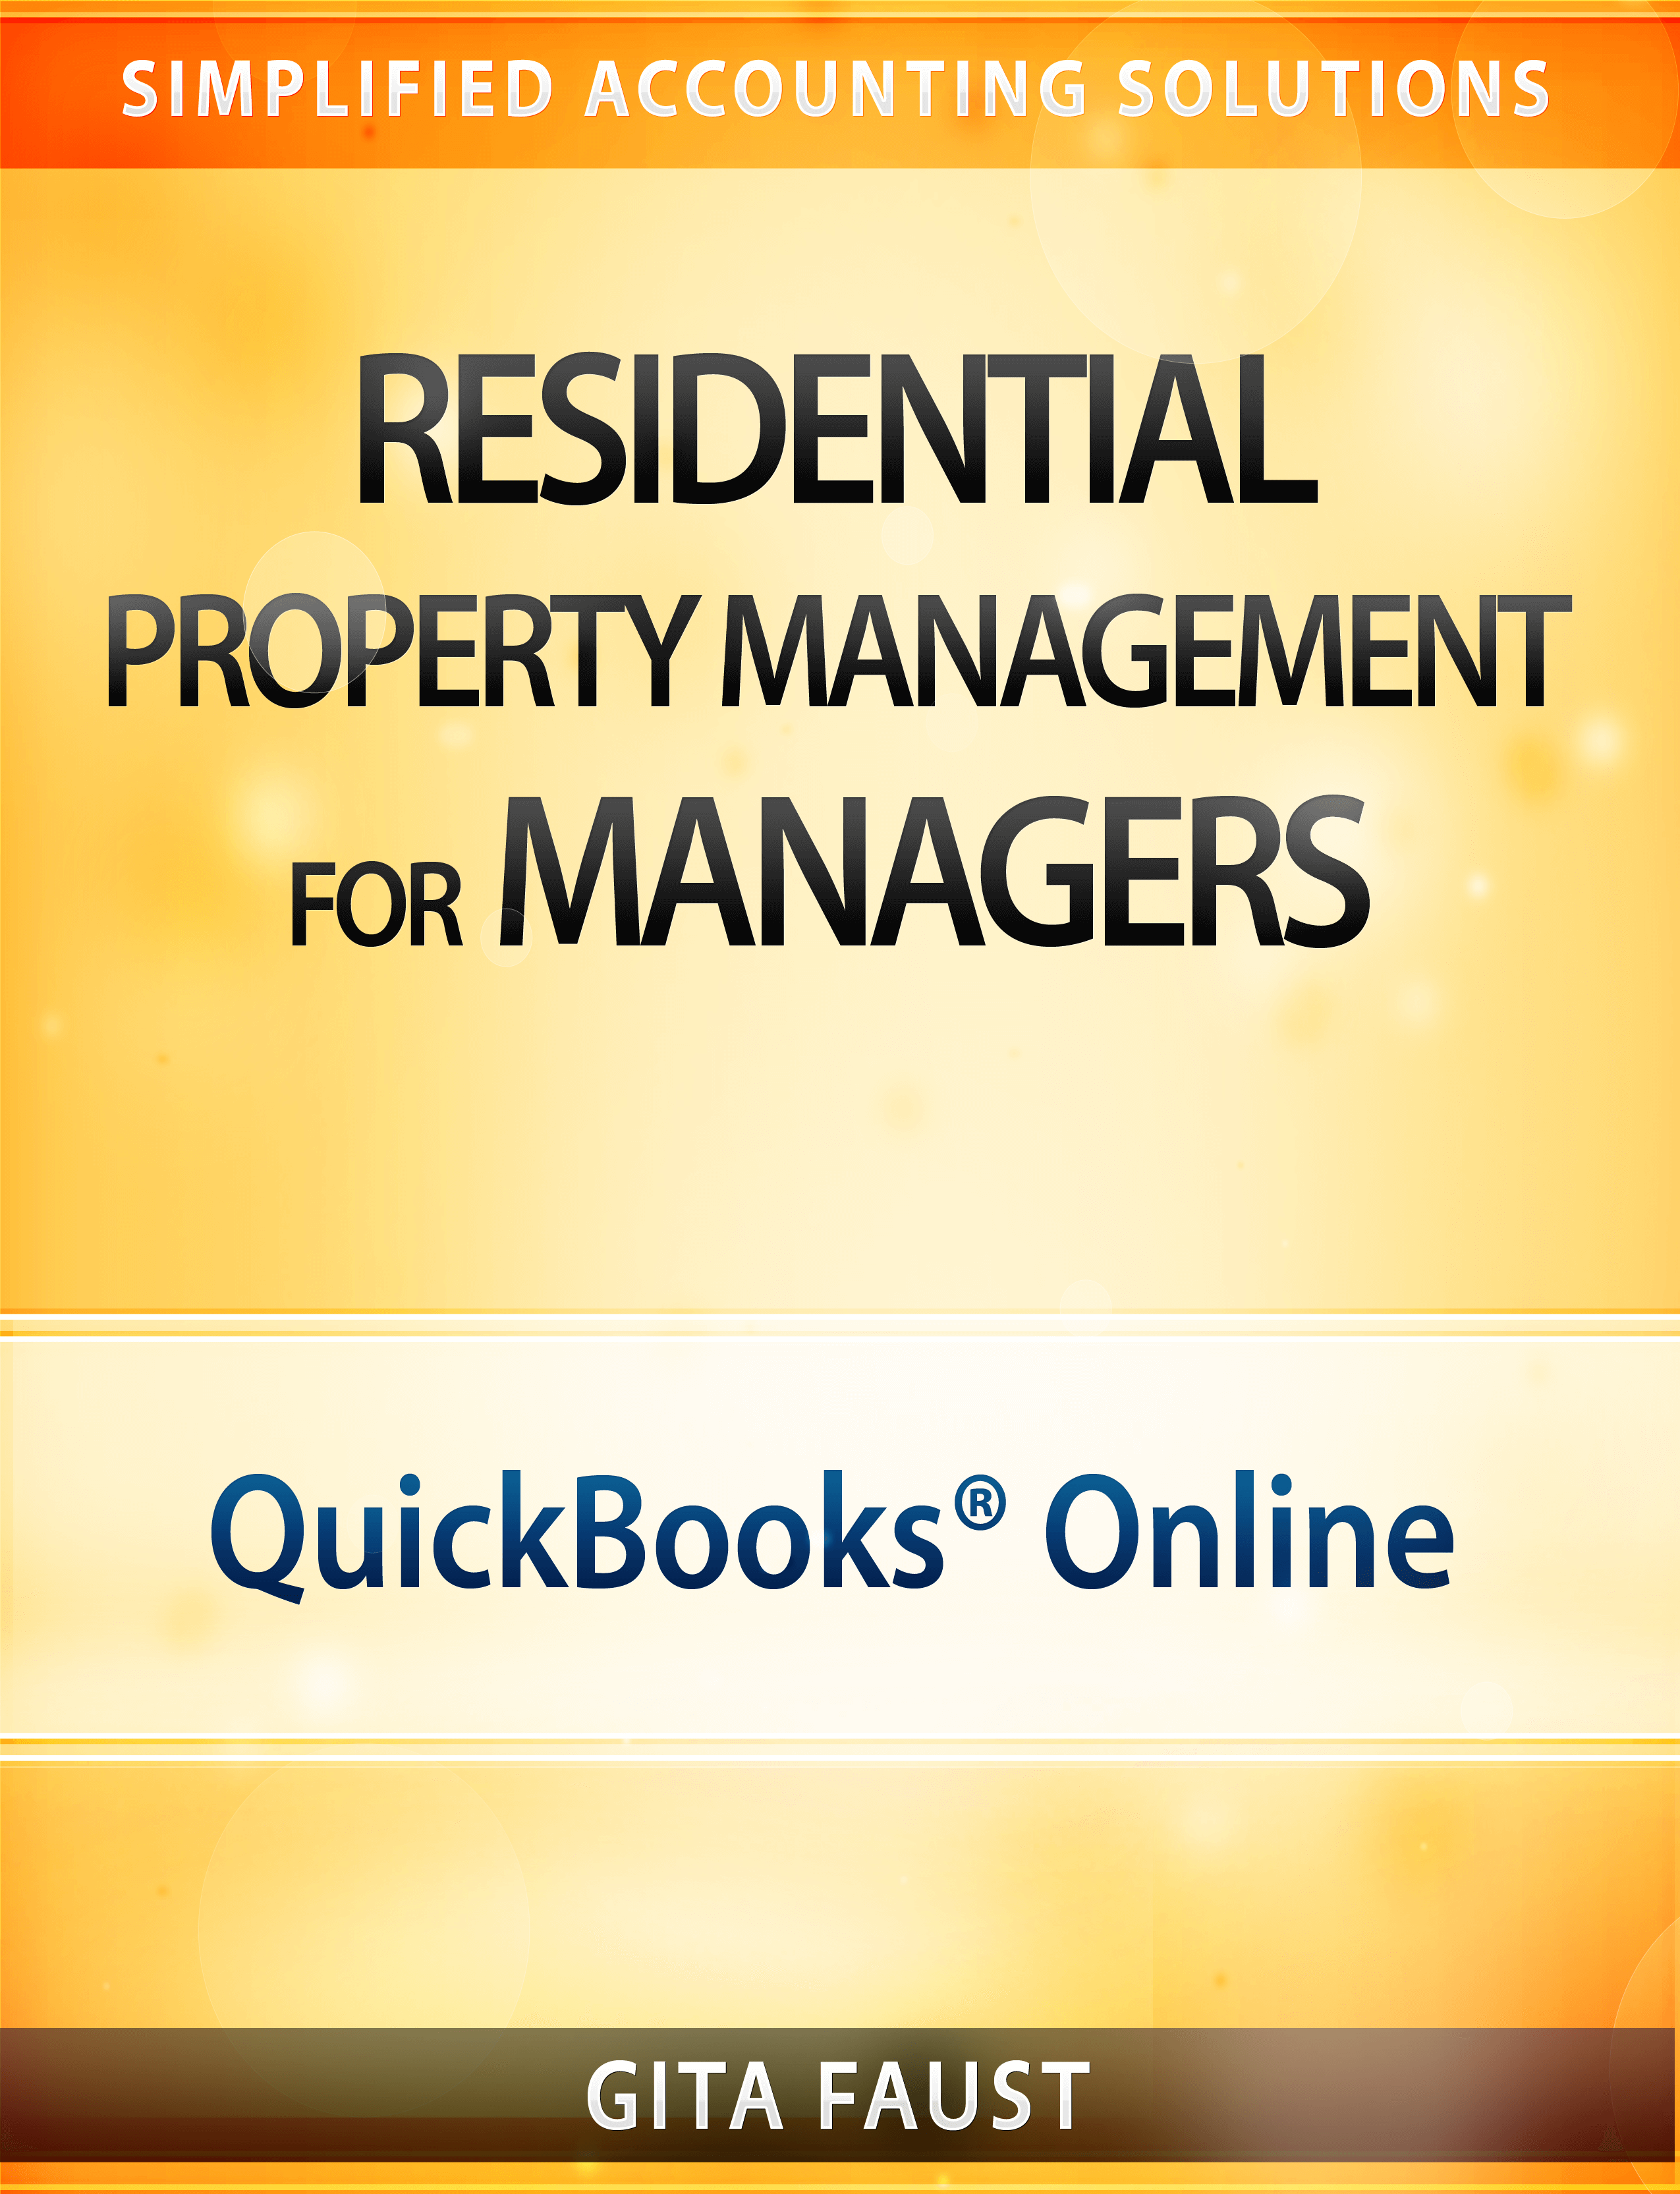 QuickBooks Online for Property Management Residential Managers